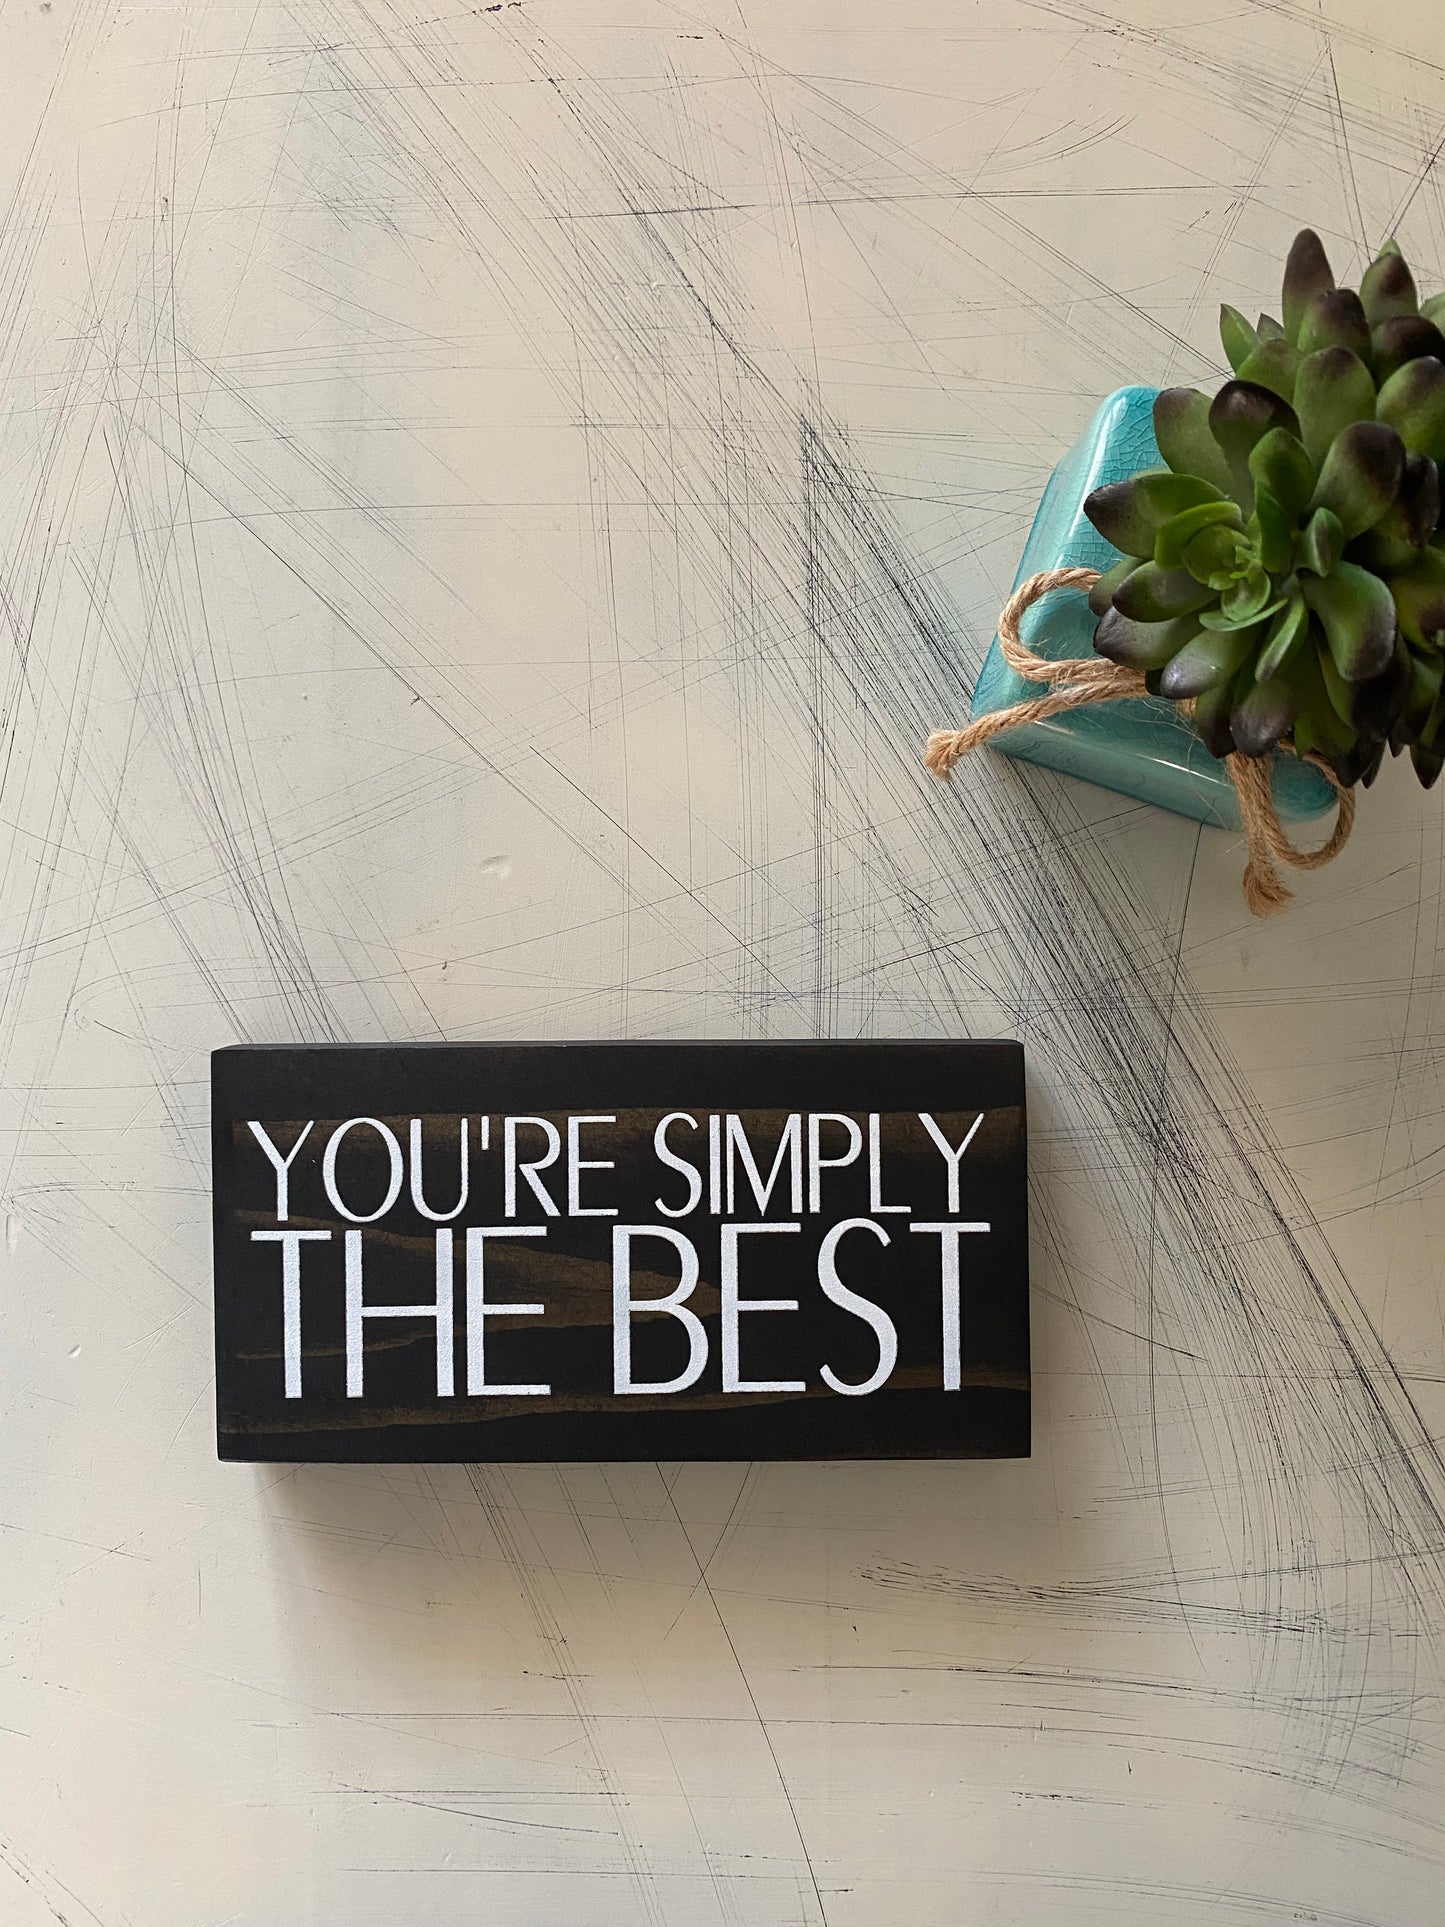 You're simply the best - handmade mini wood sign